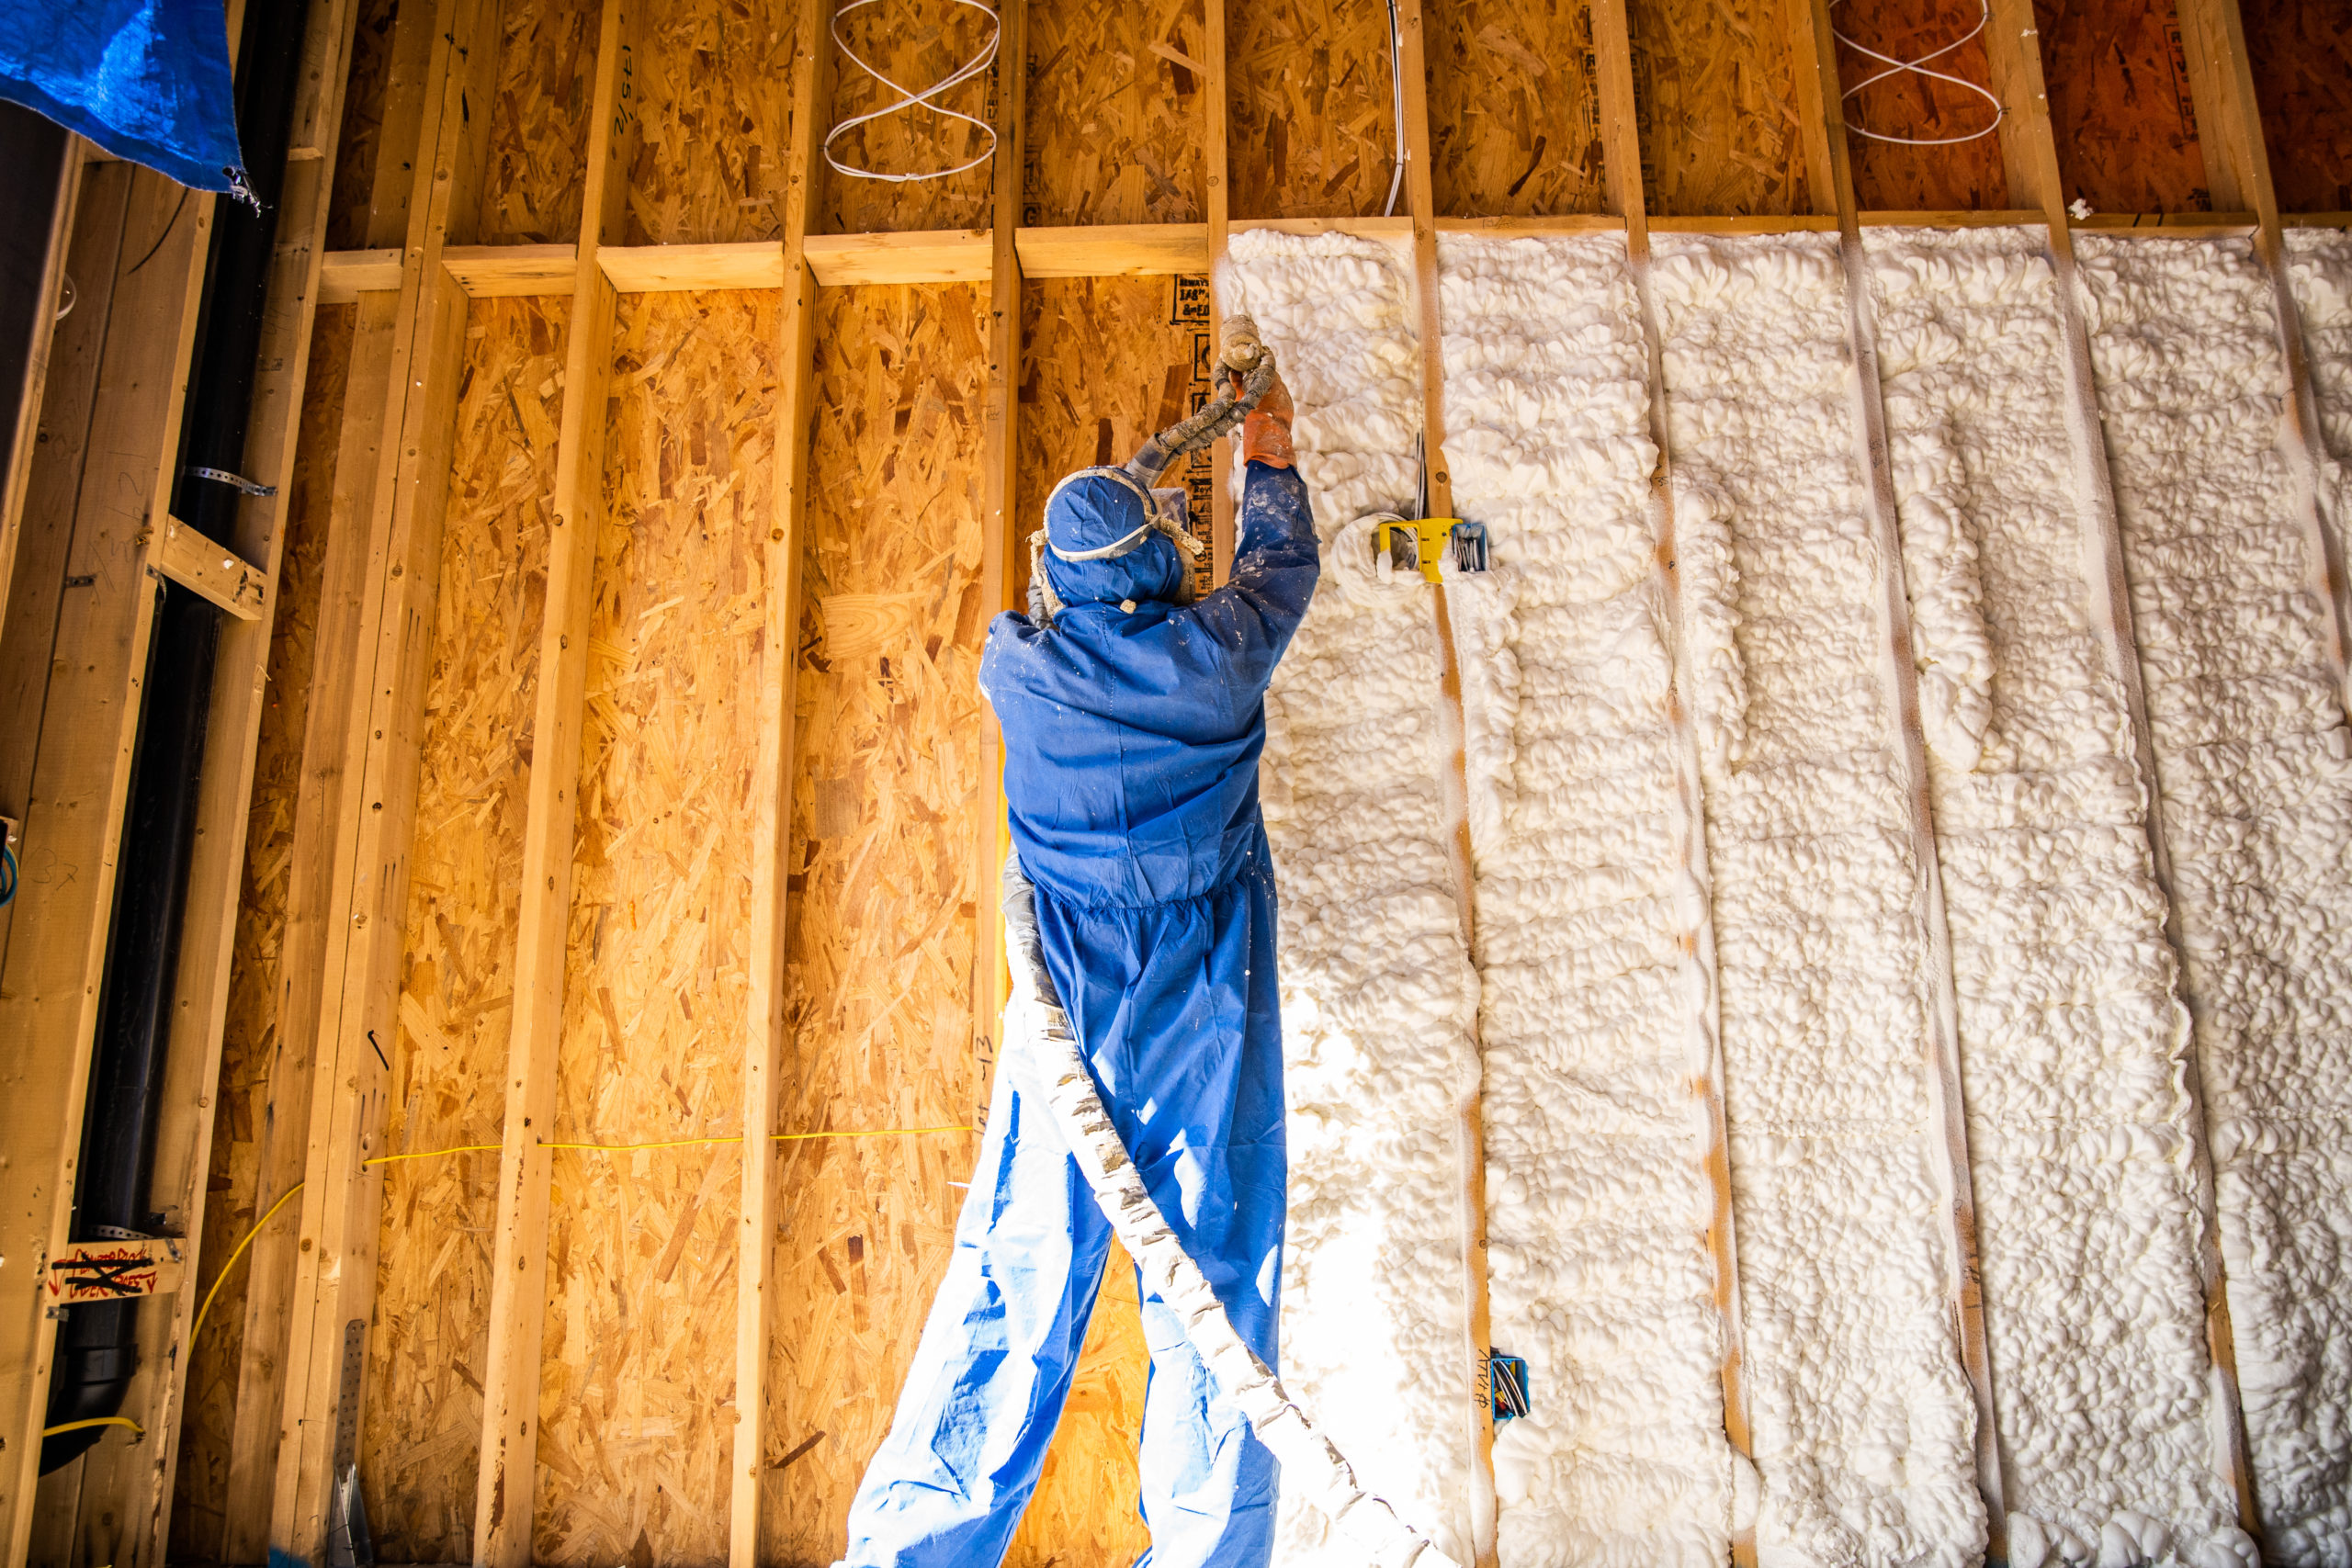 Hot, warm weather affects spray foam installations in the summertime.